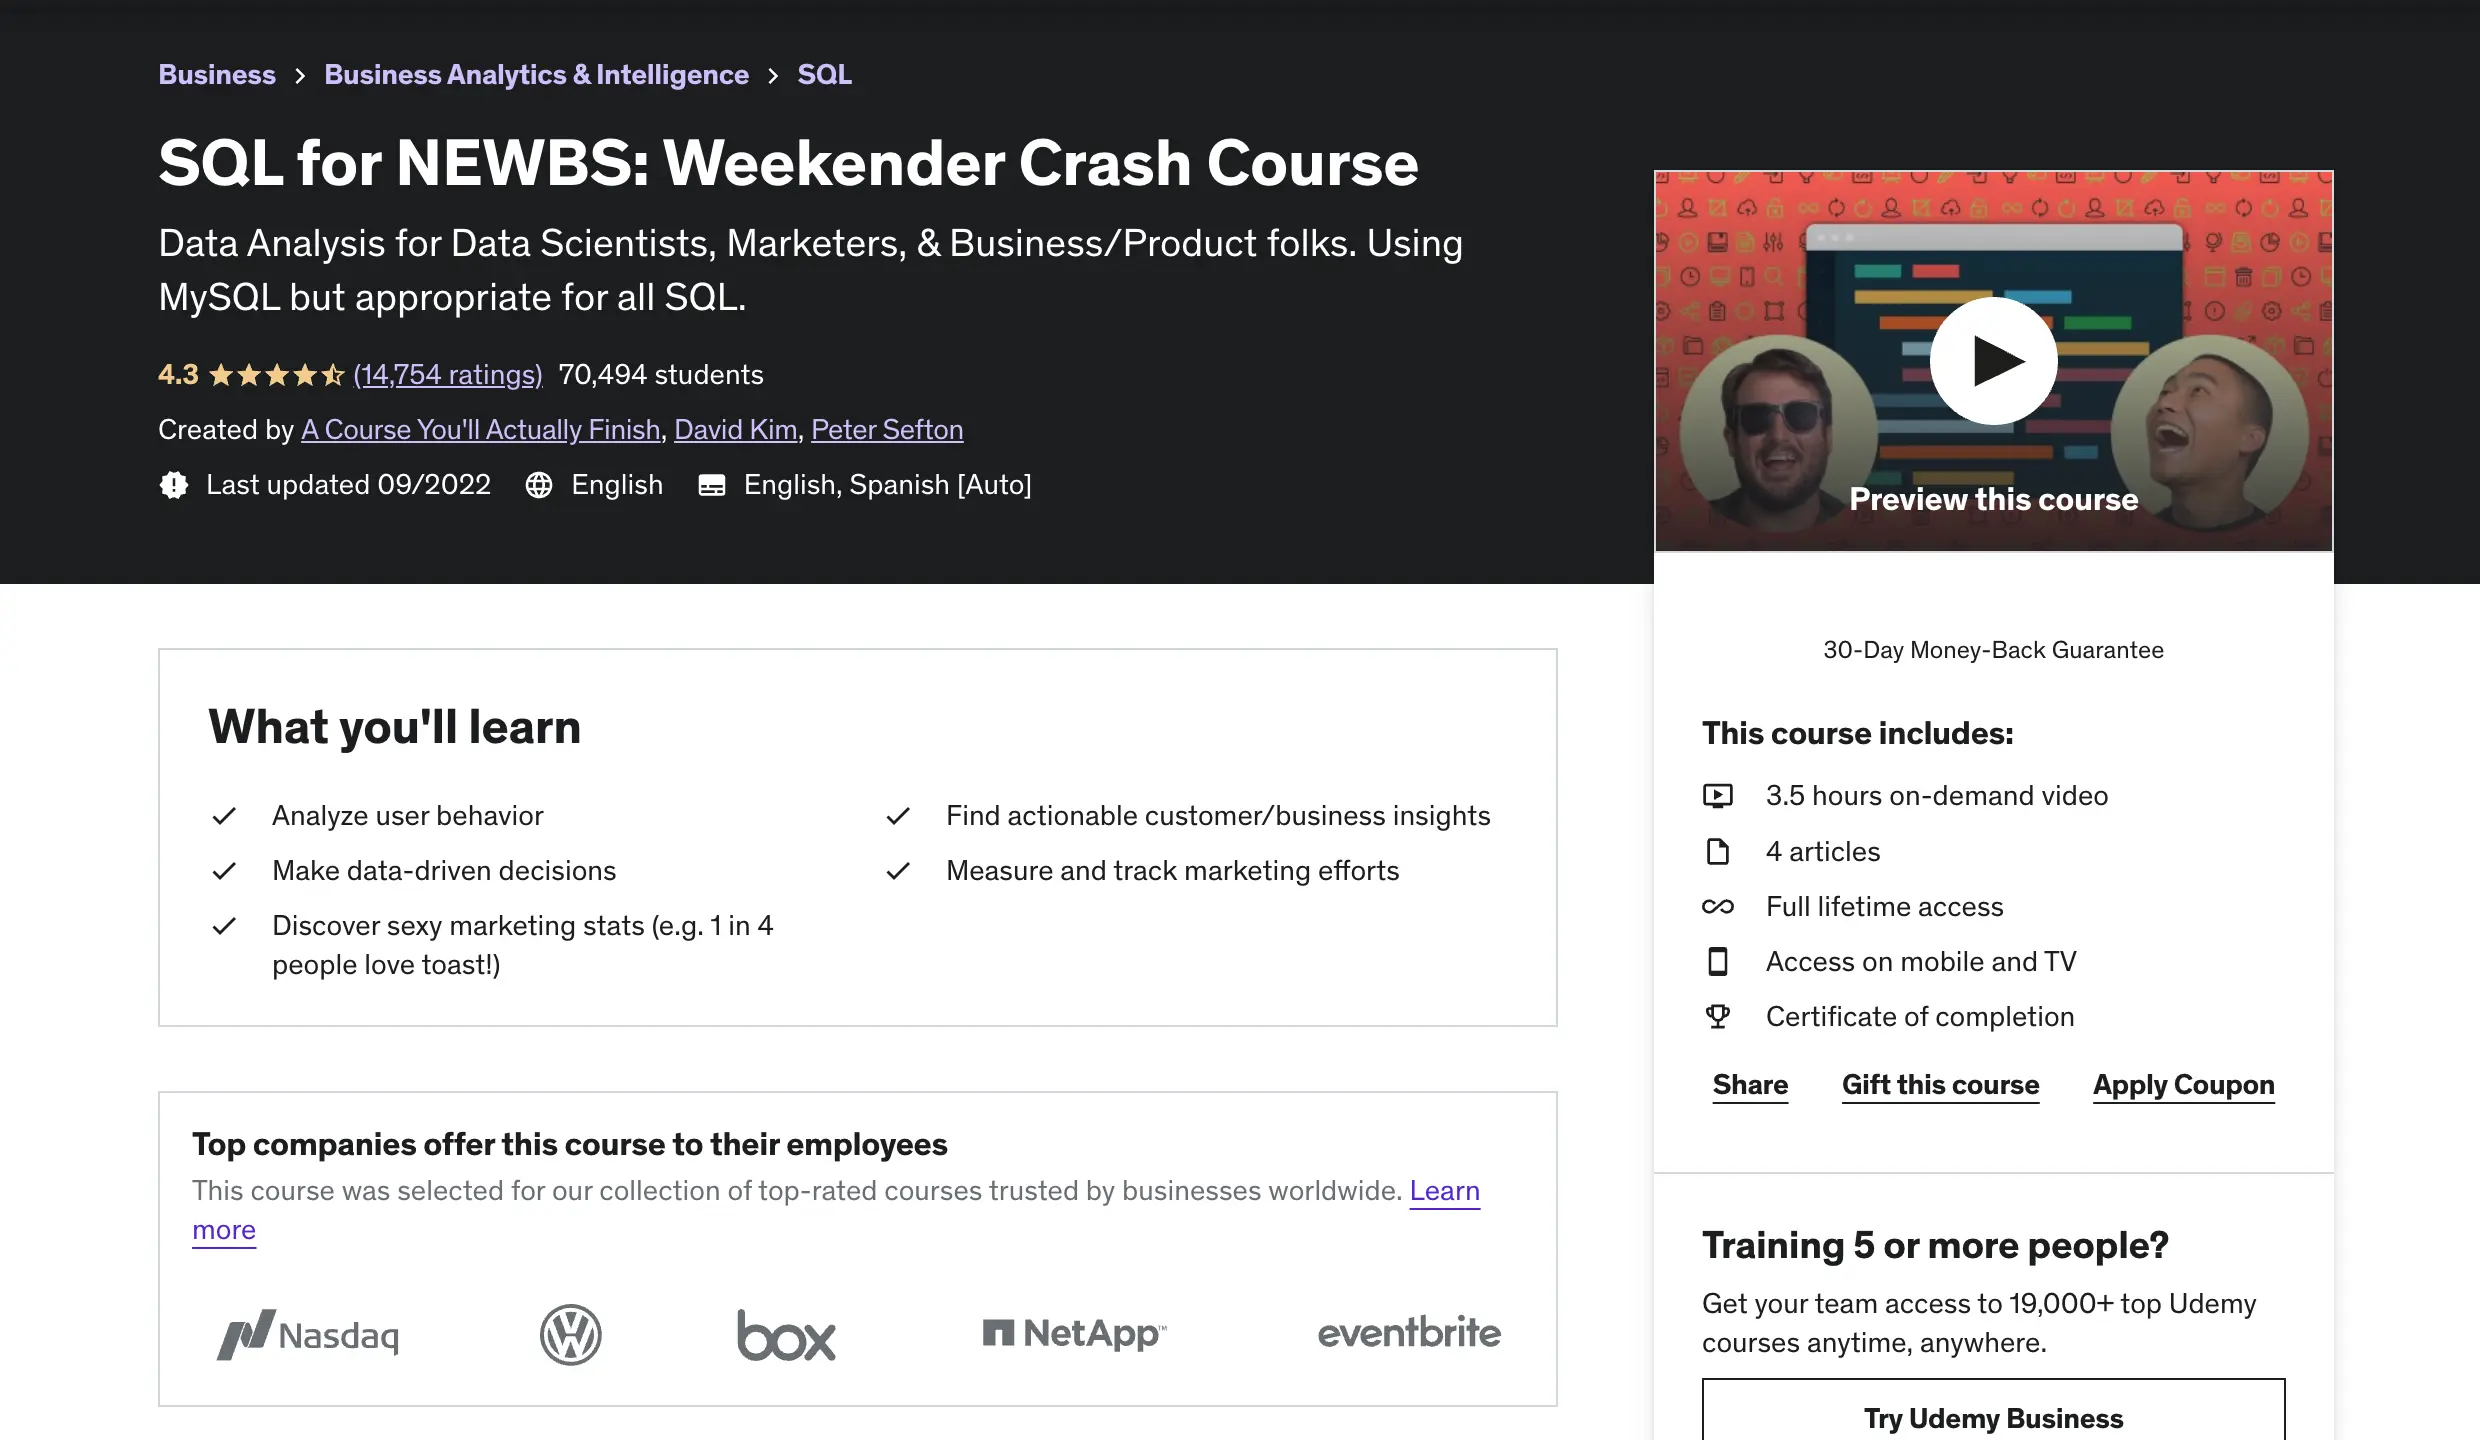 SQL for NEWBS: Weekender Crash Course